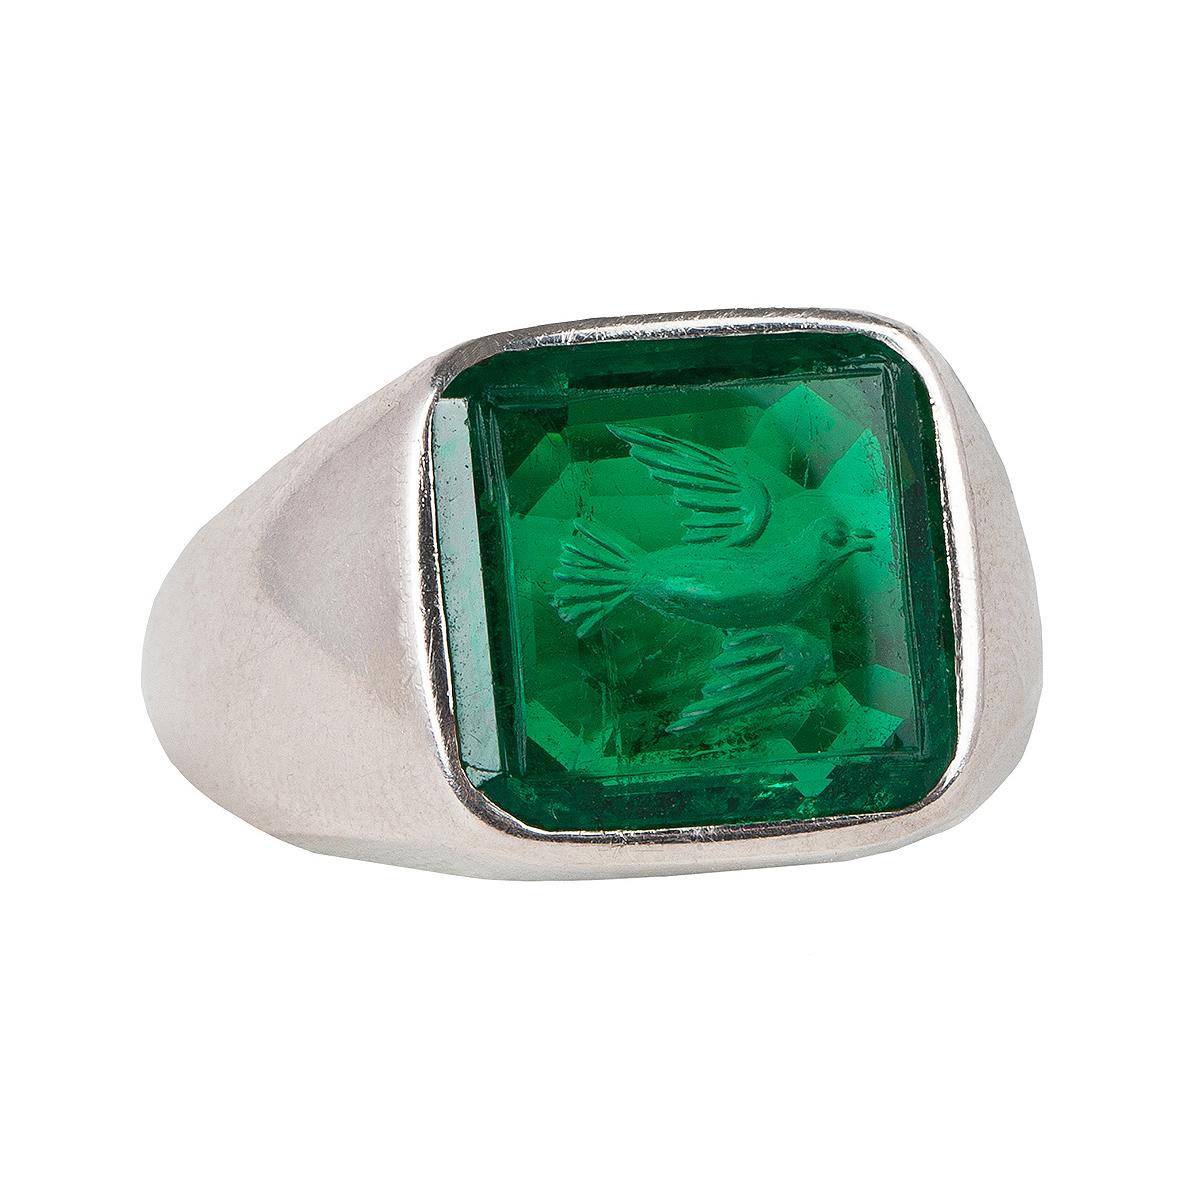  This ring a true piece of history made by a world-renowned jeweler. 
This emerald is 4.6 carats and is from Colombia. 
This is a vintage emerald from the 1920 era featuring an engraved bird motif.
We have 3 certificates for this ring. They are